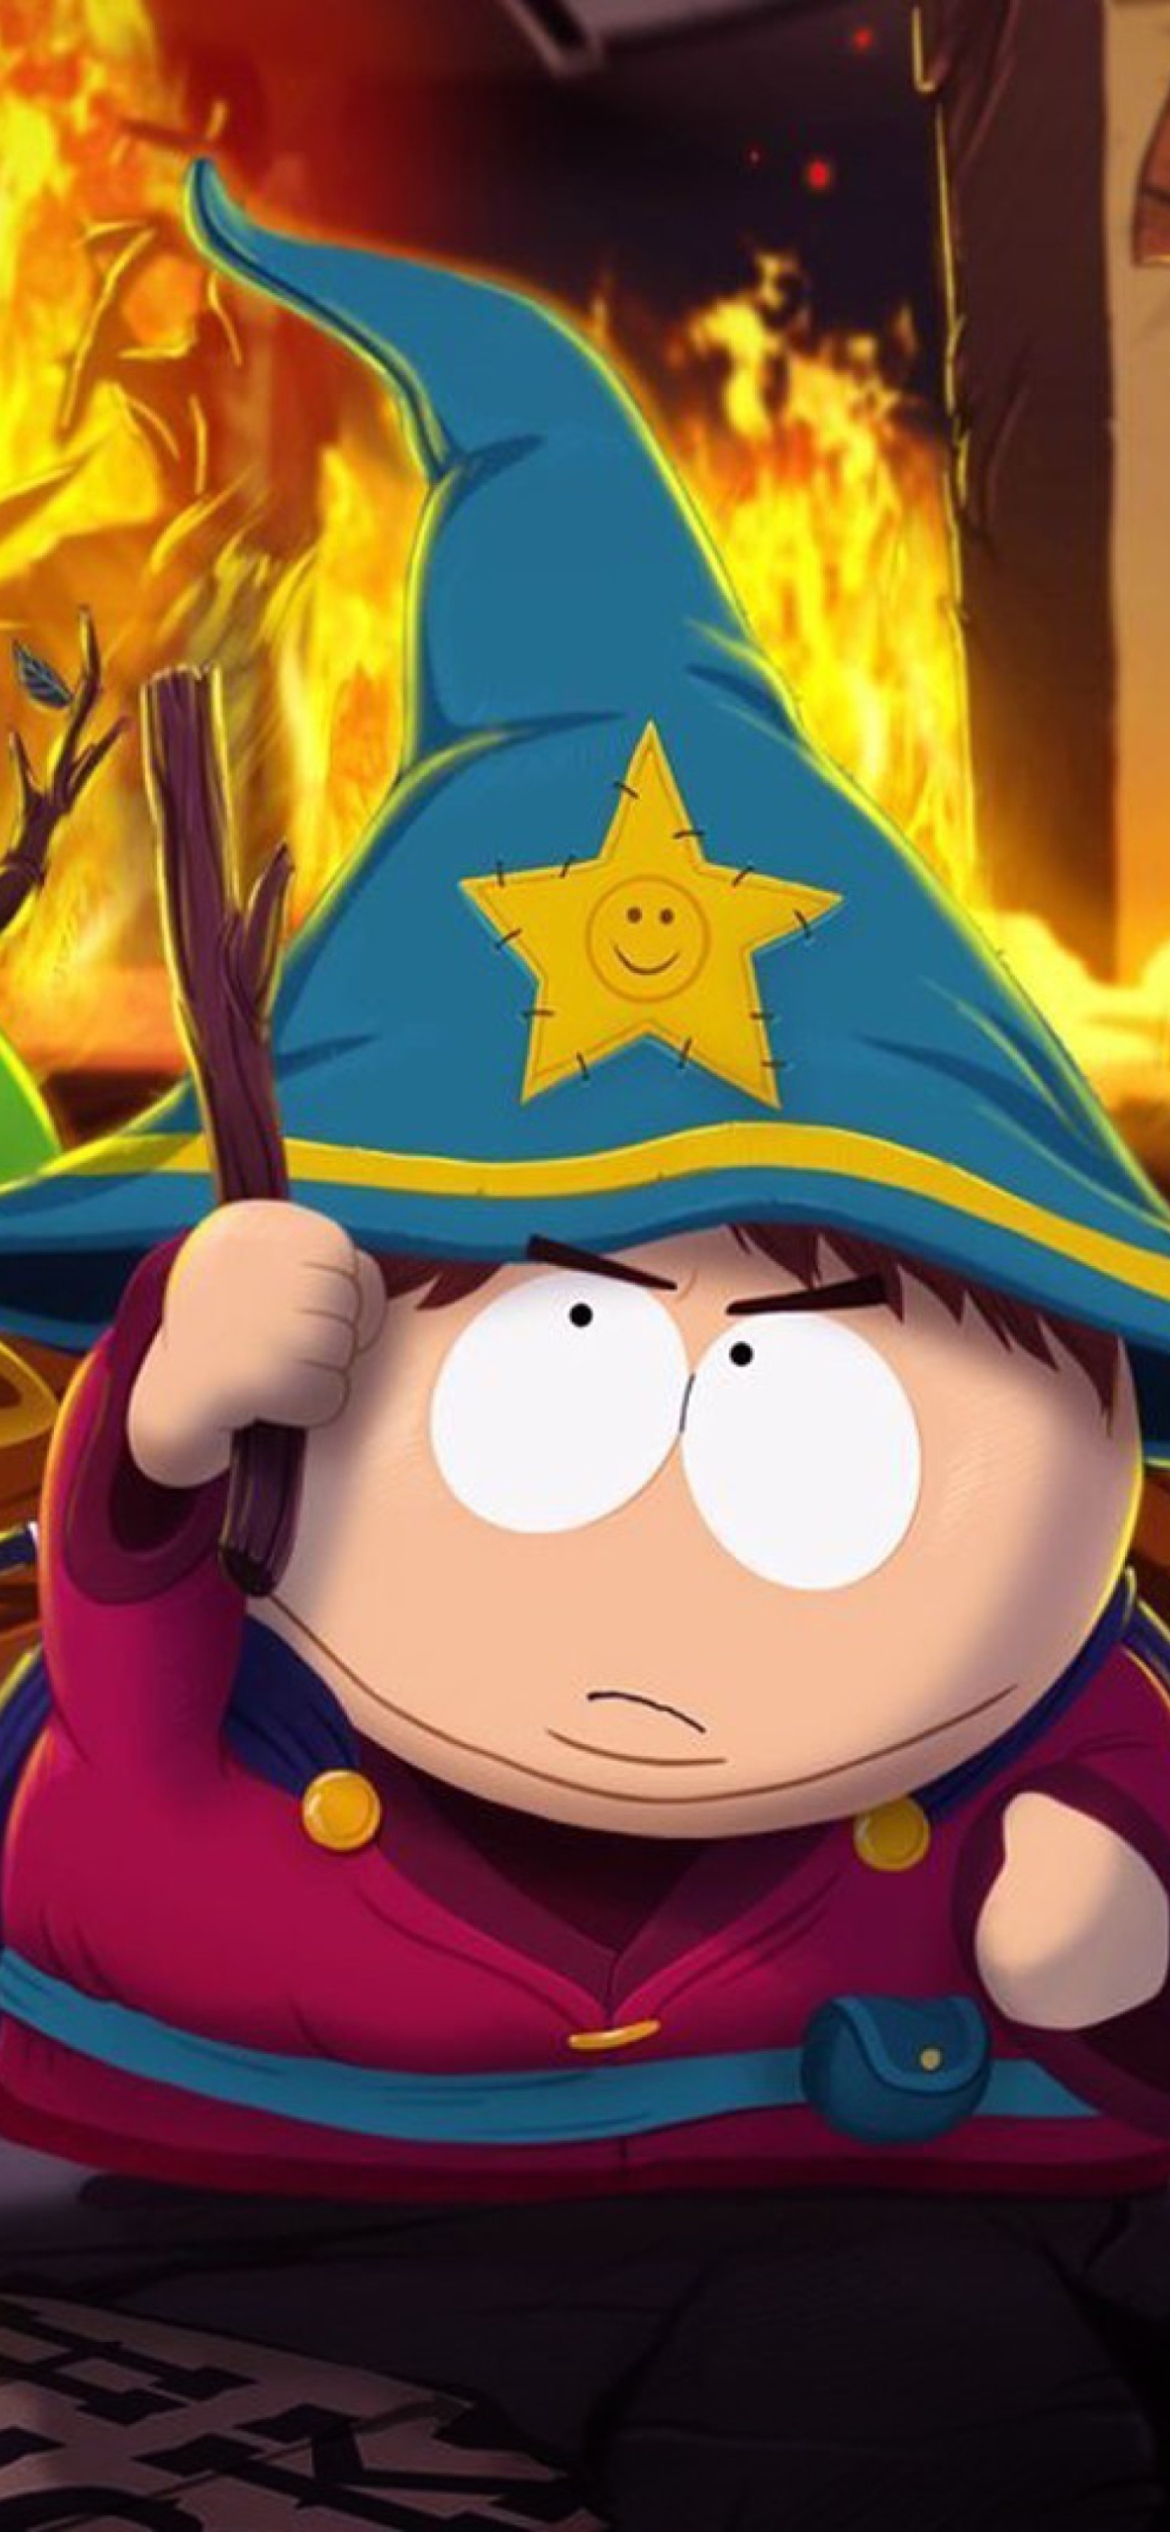 South Park: The Stick Of Truth wallpaper 1170x2532